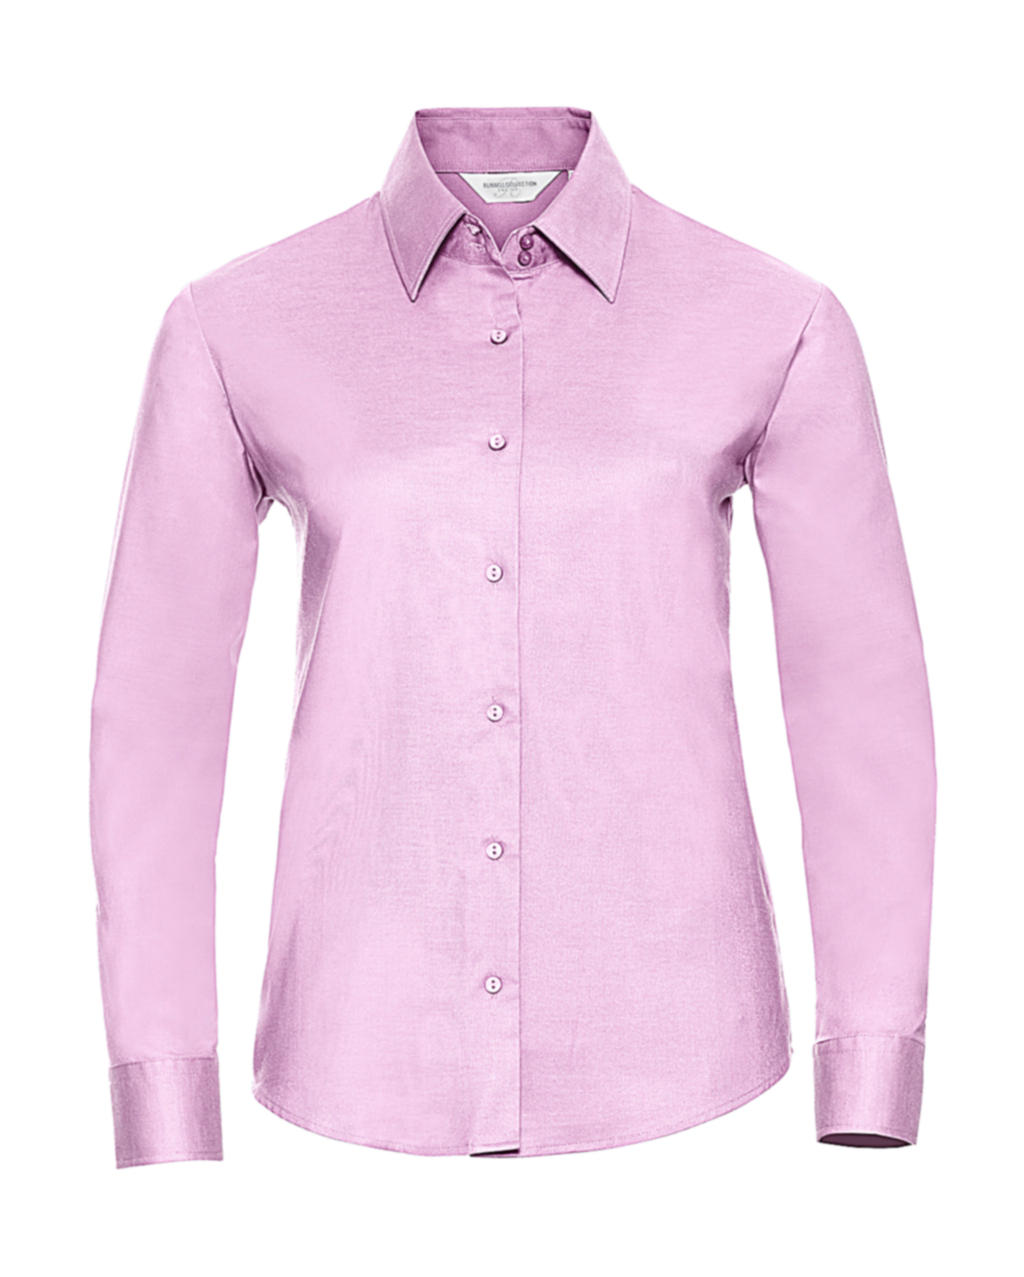  Ladies Classic Oxford Shirt LS in Farbe Classic Pink